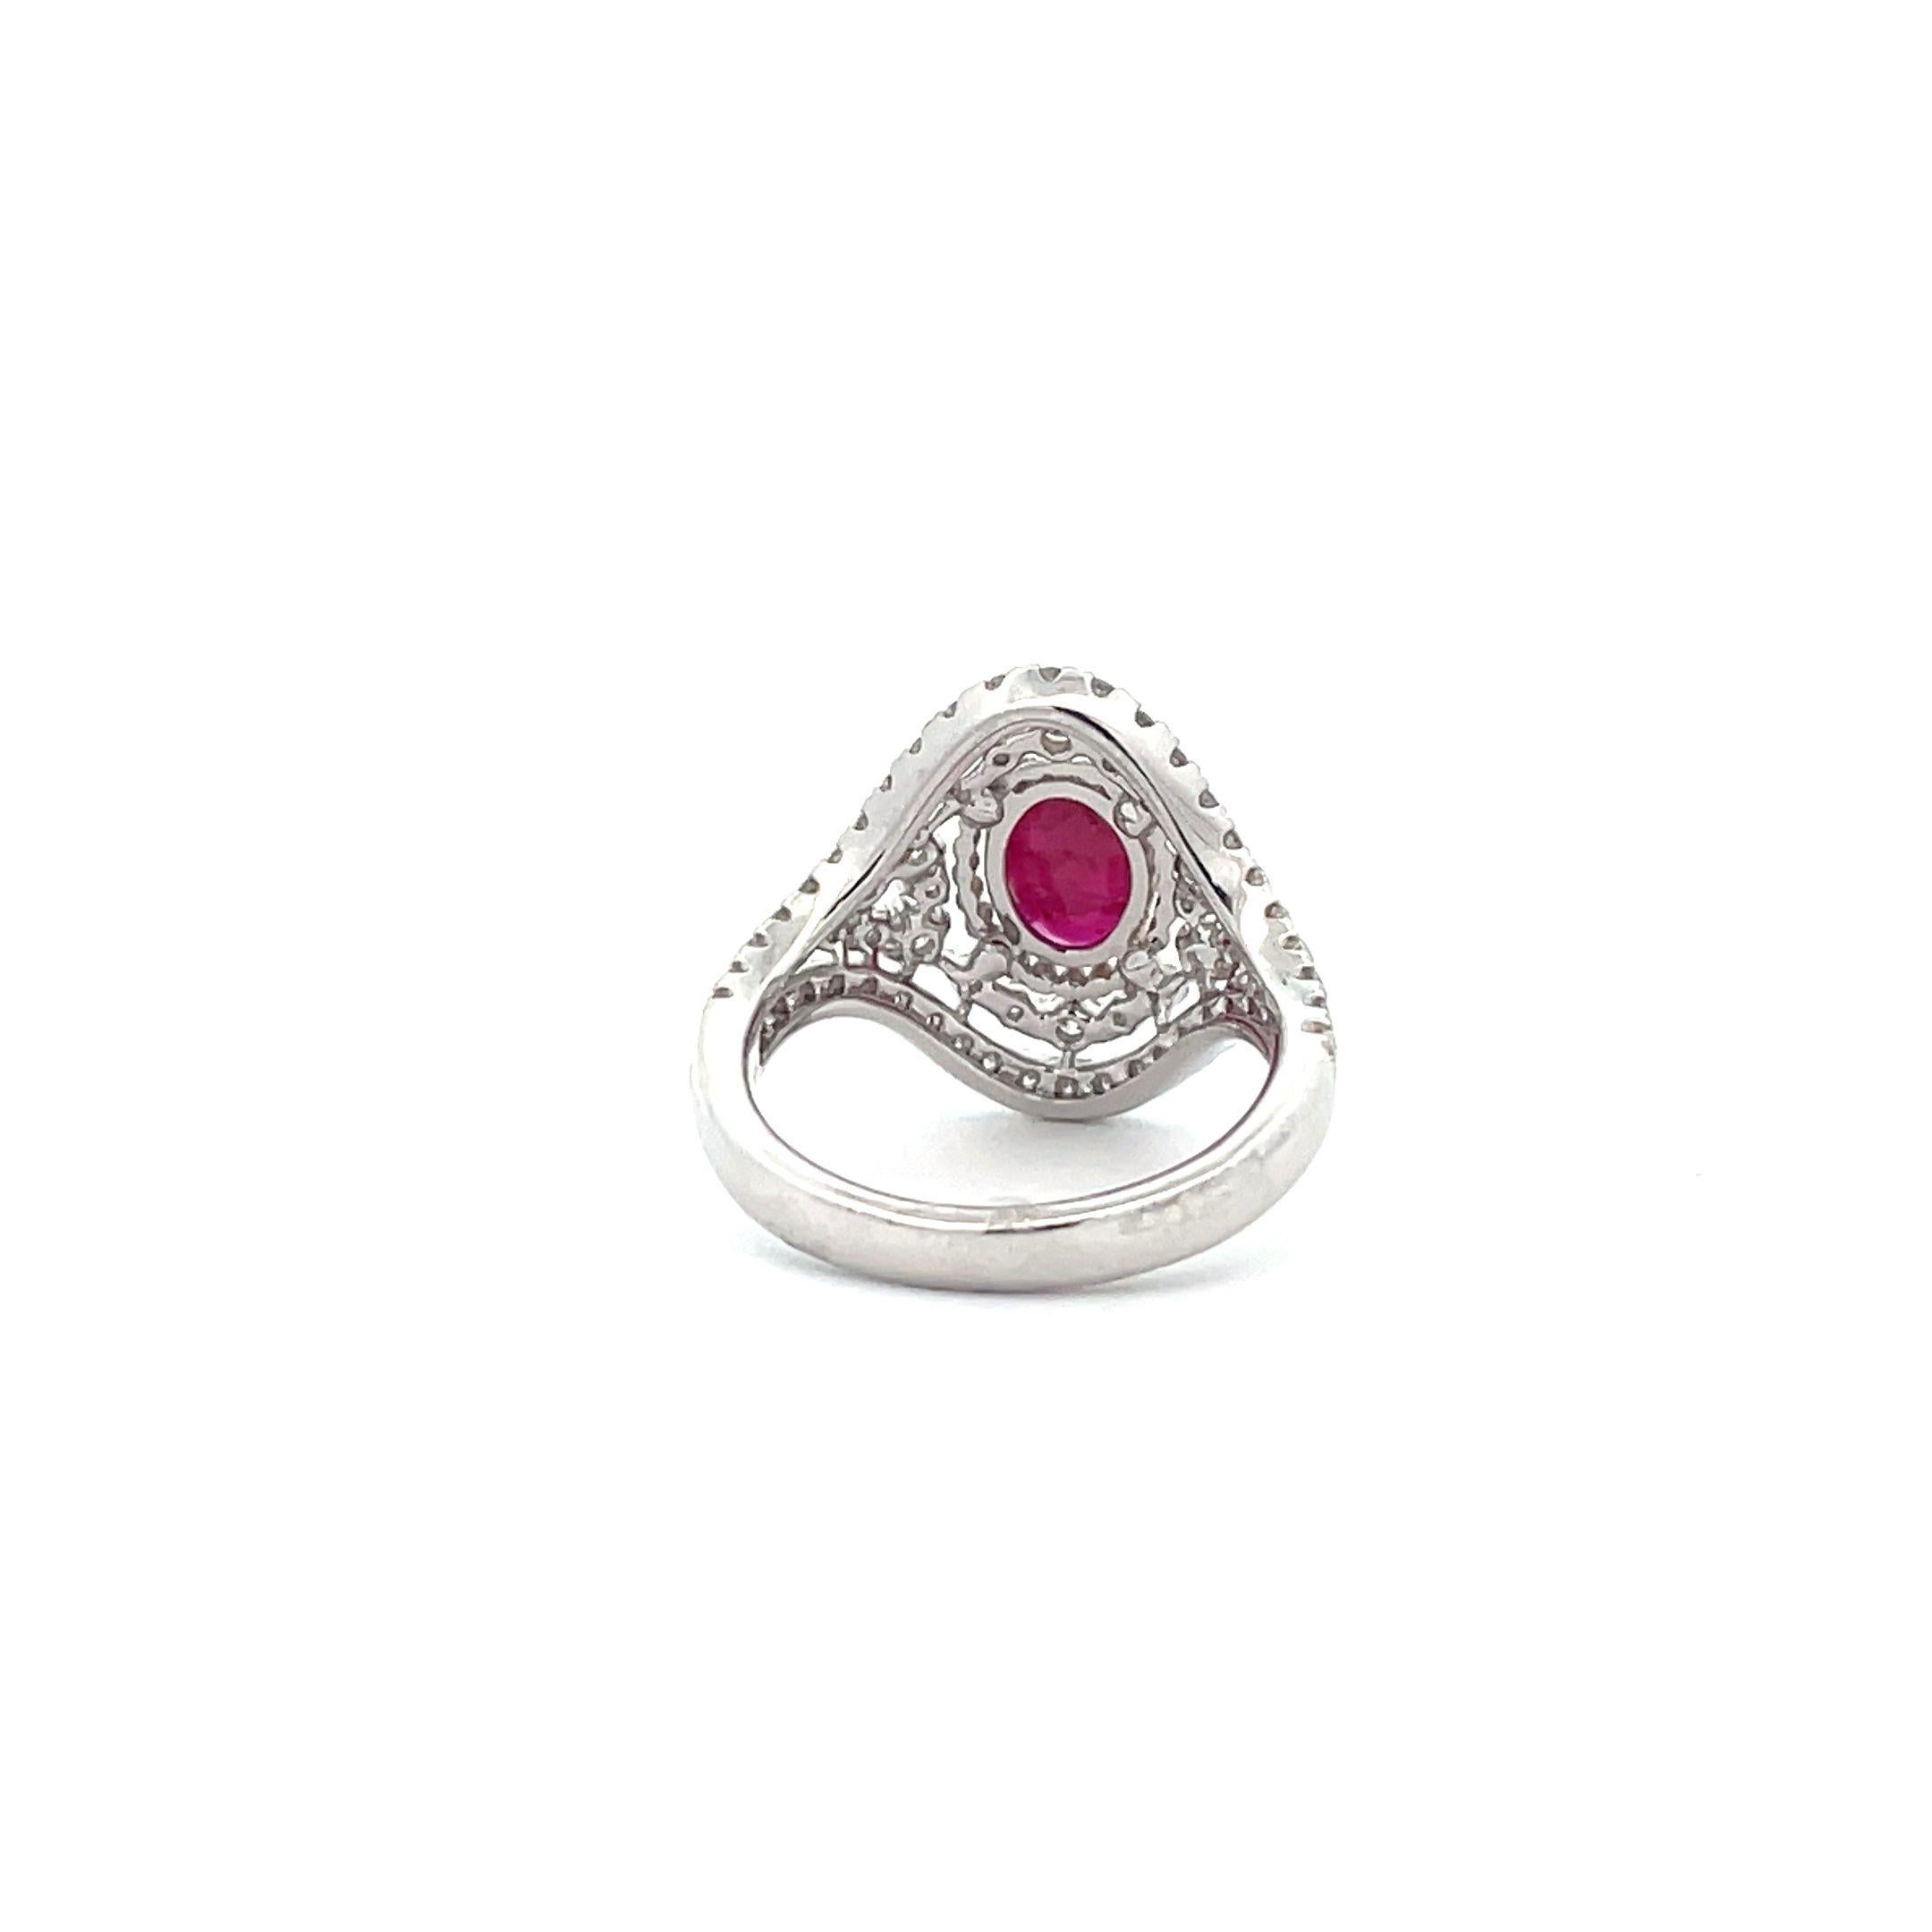 Art Deco 1.40 Carat, Oval-Cut Ruby Diamond Cluster Halo Cocktail Engagement Ring